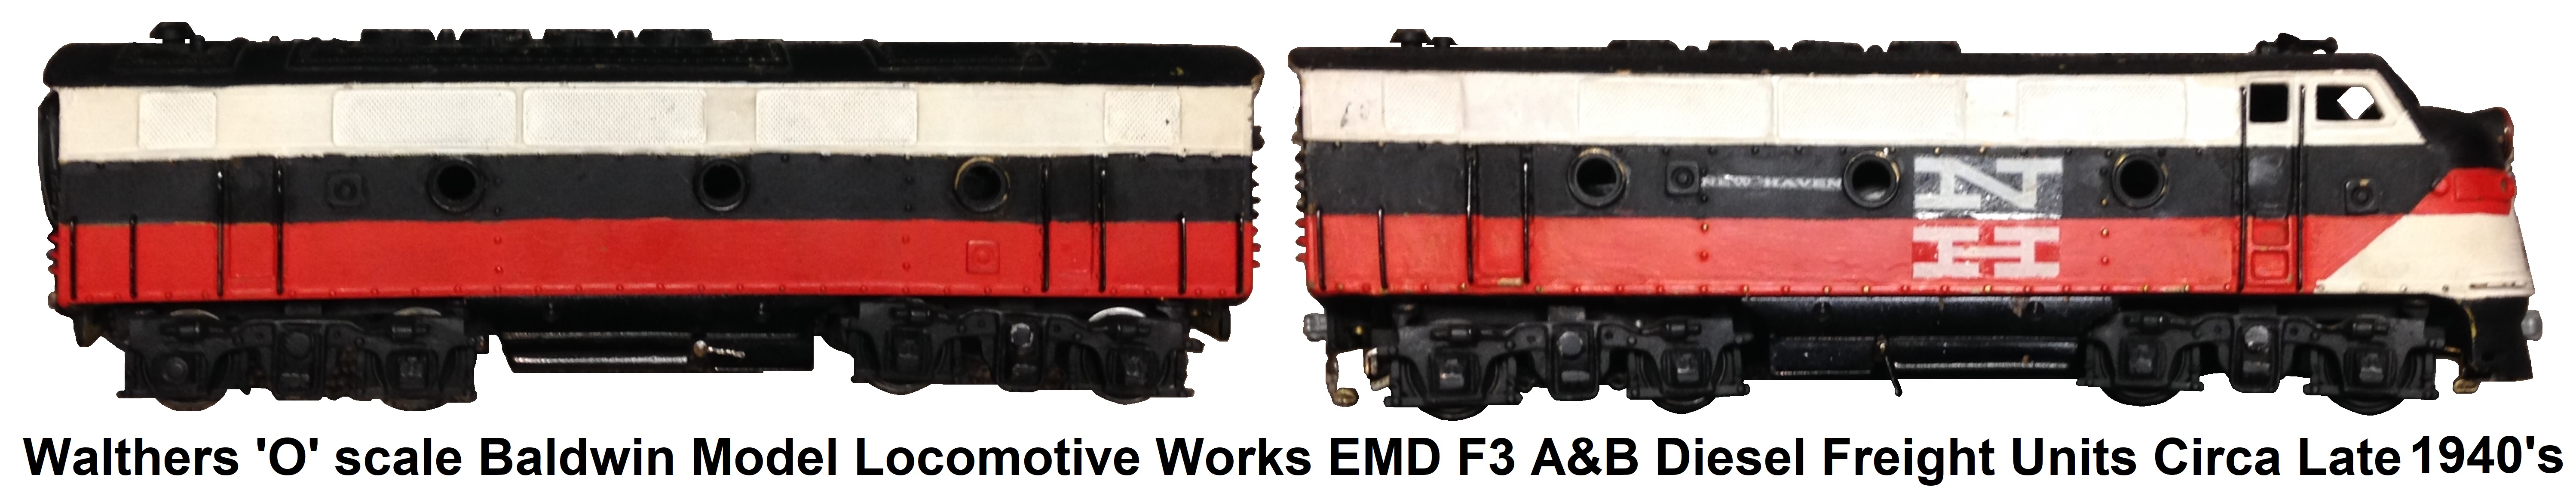 Walthers 'O' scale B-Lectric Line Baldwin Model Locomotive Works EMD F3 A&B Diesel Freight Units Circa Late 1940's